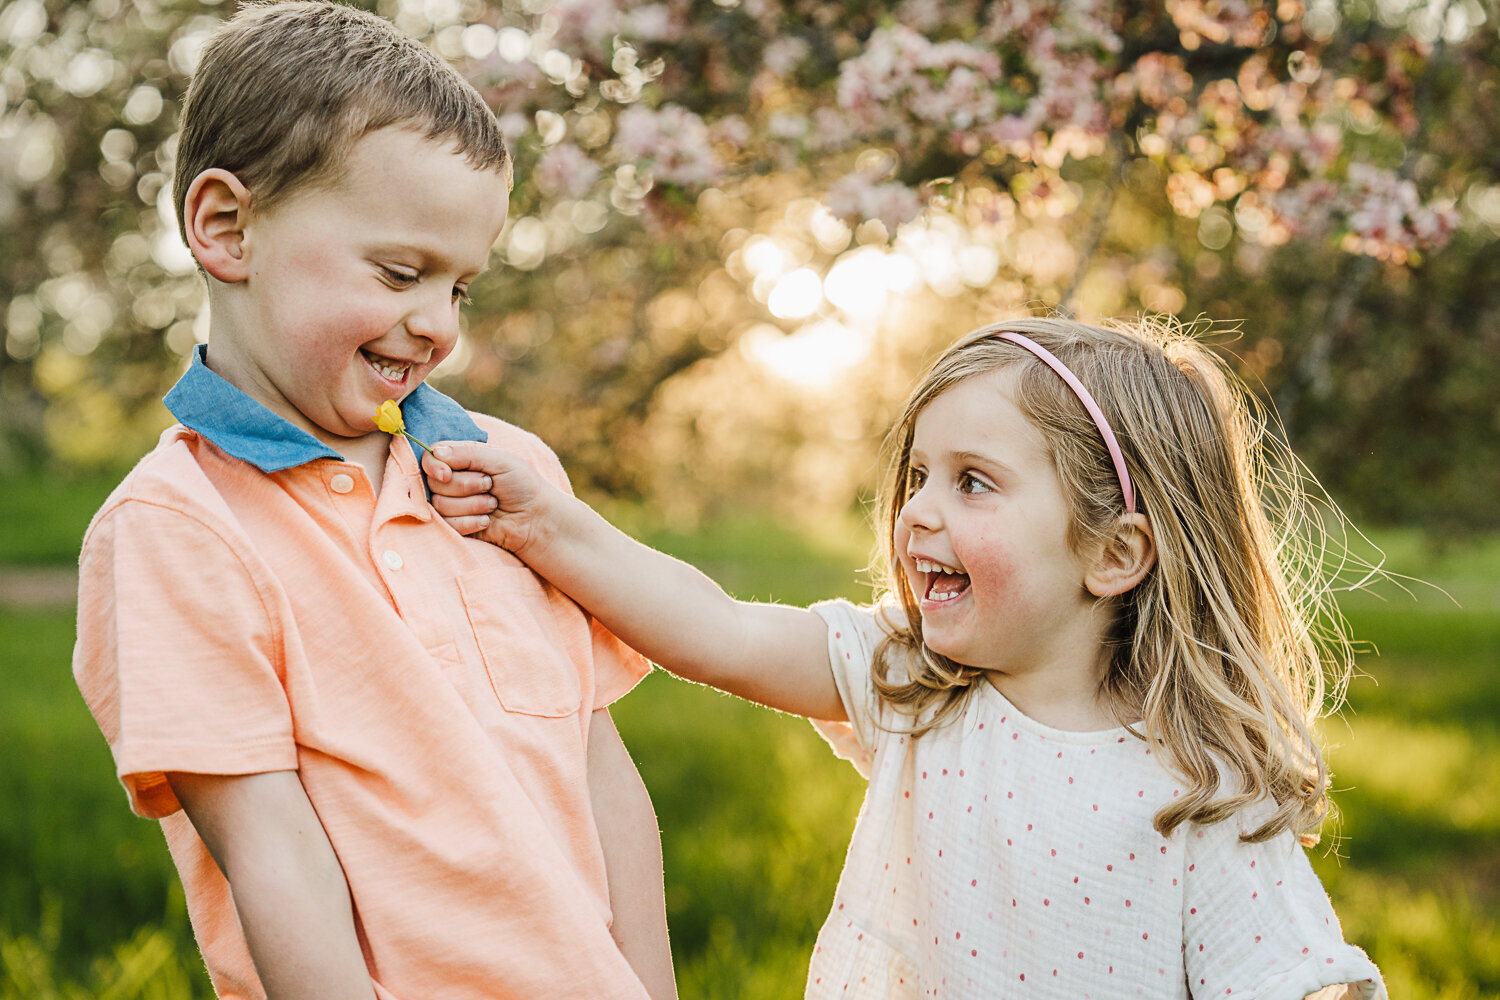 two kids laugh together under blossoming trees at sunset